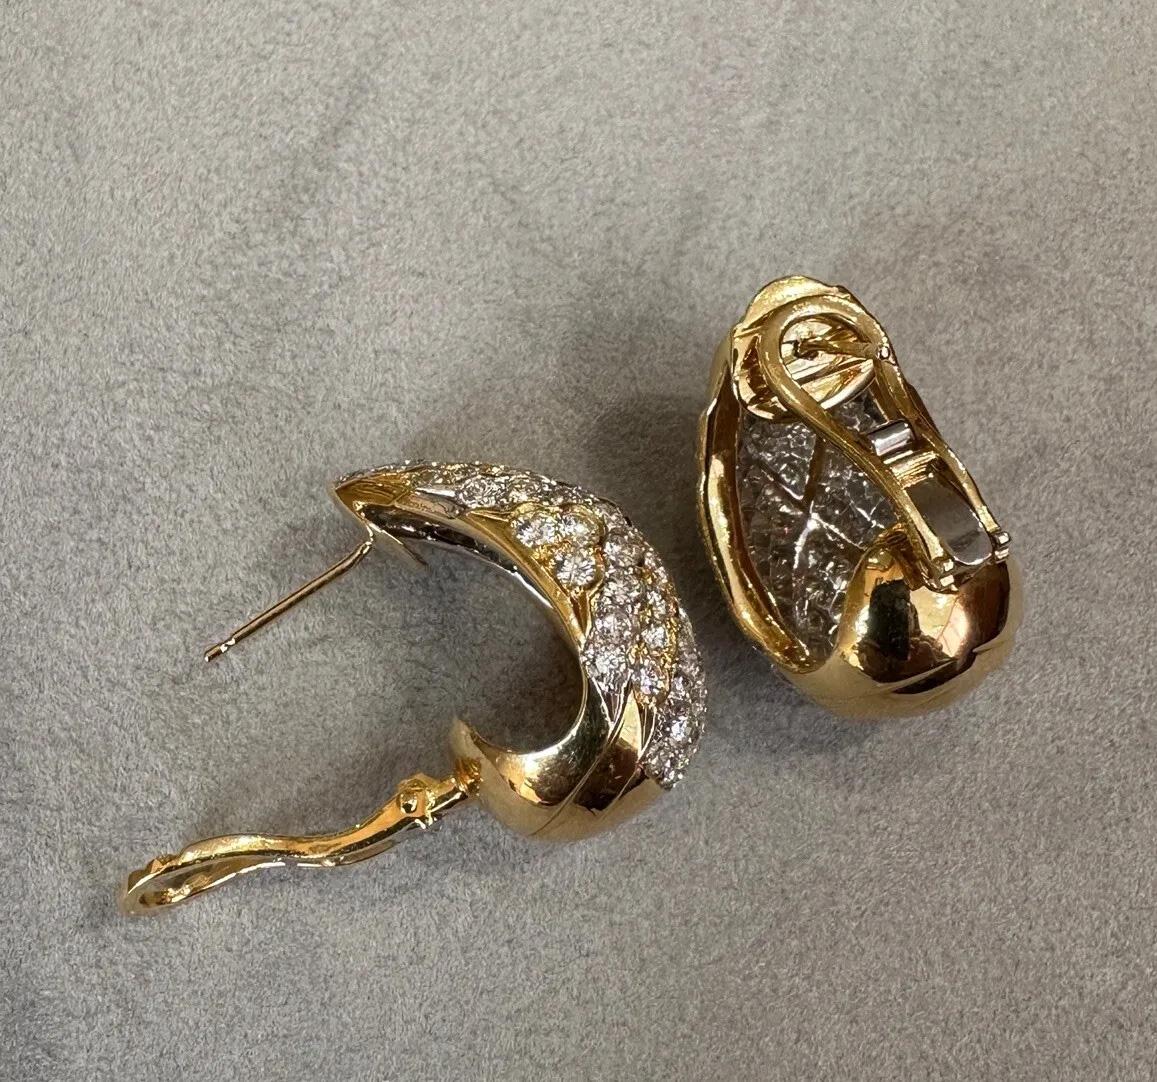 Estate Diamond Pave Drop Earrings 7.40 Carat Total Weight in 18k Yellow Gold In Excellent Condition For Sale In La Jolla, CA